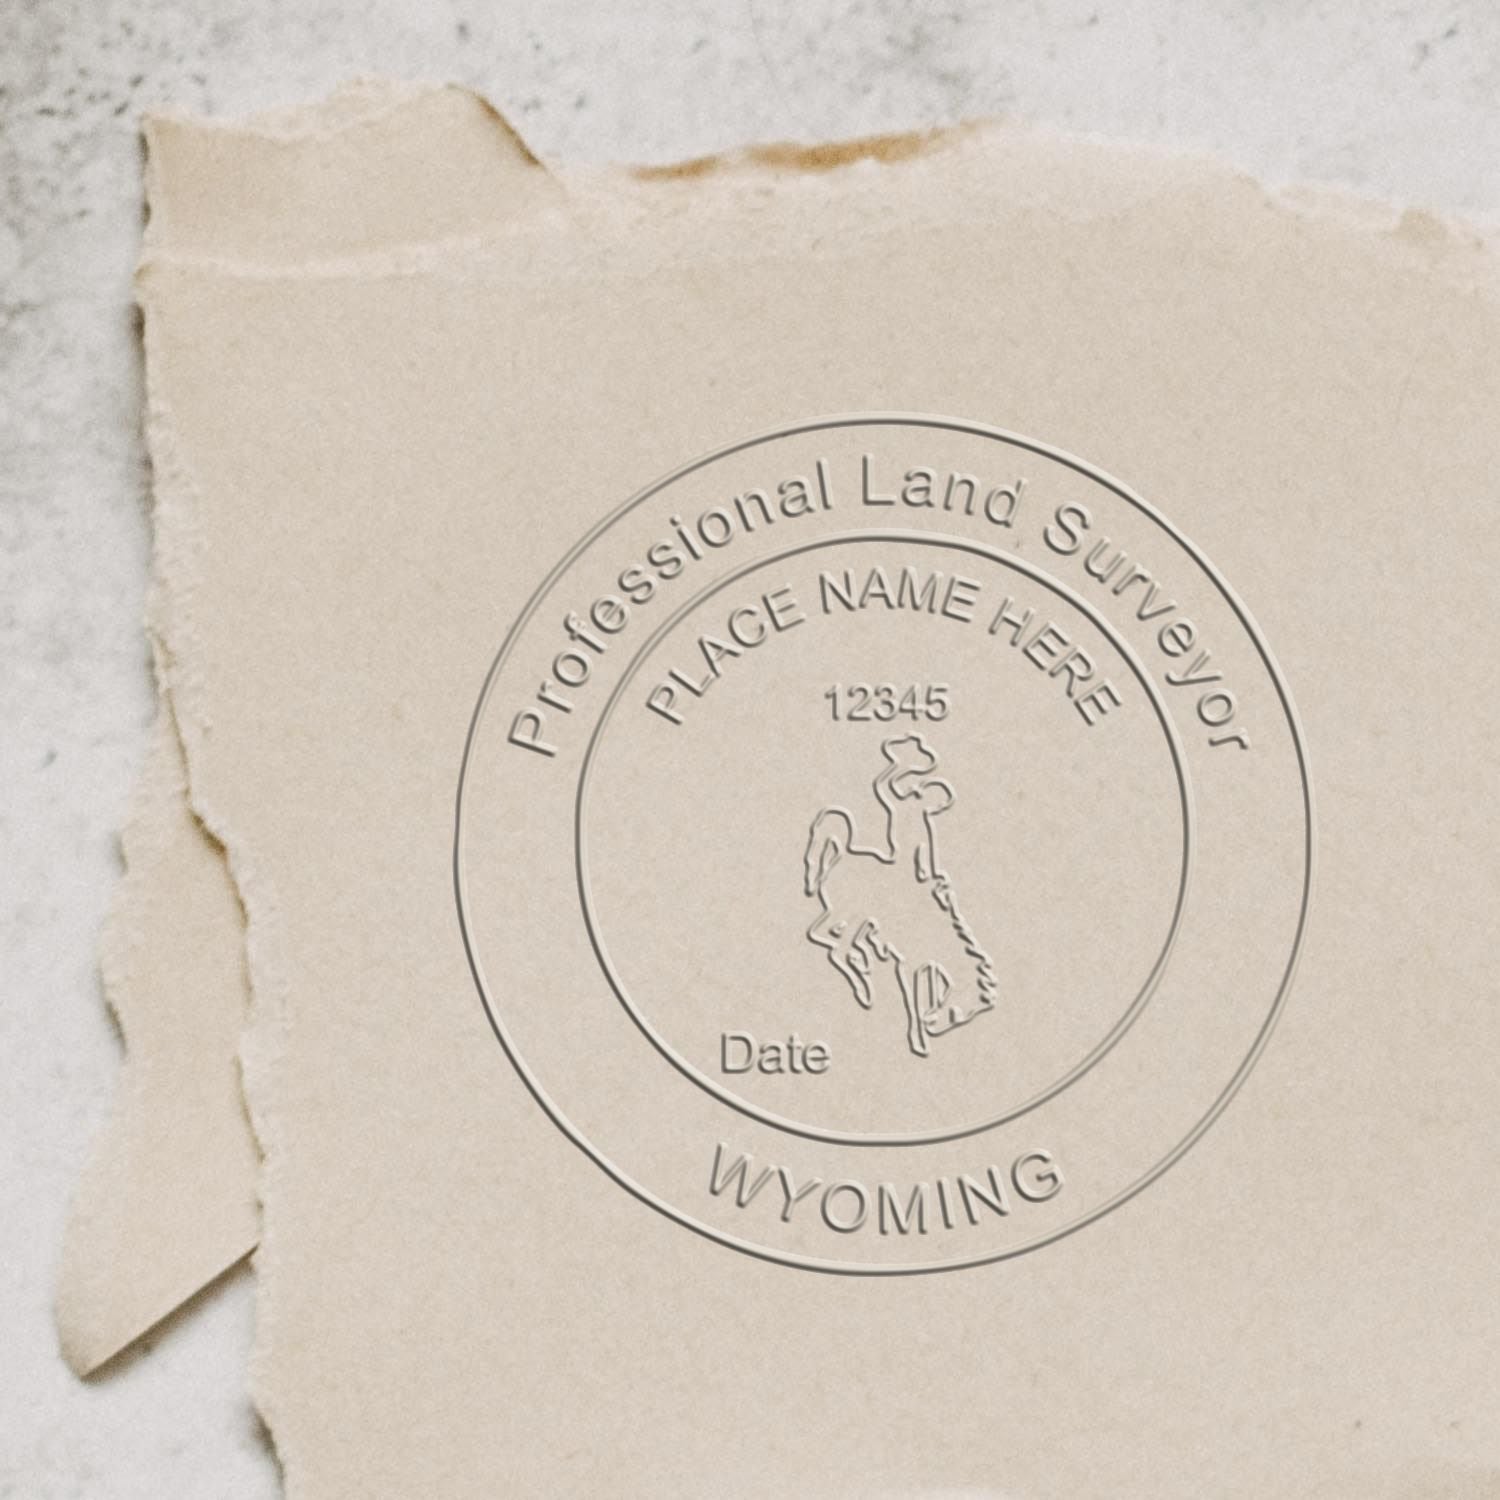 The Gift Wyoming Land Surveyor Seal stamp impression comes to life with a crisp, detailed image stamped on paper - showcasing true professional quality.